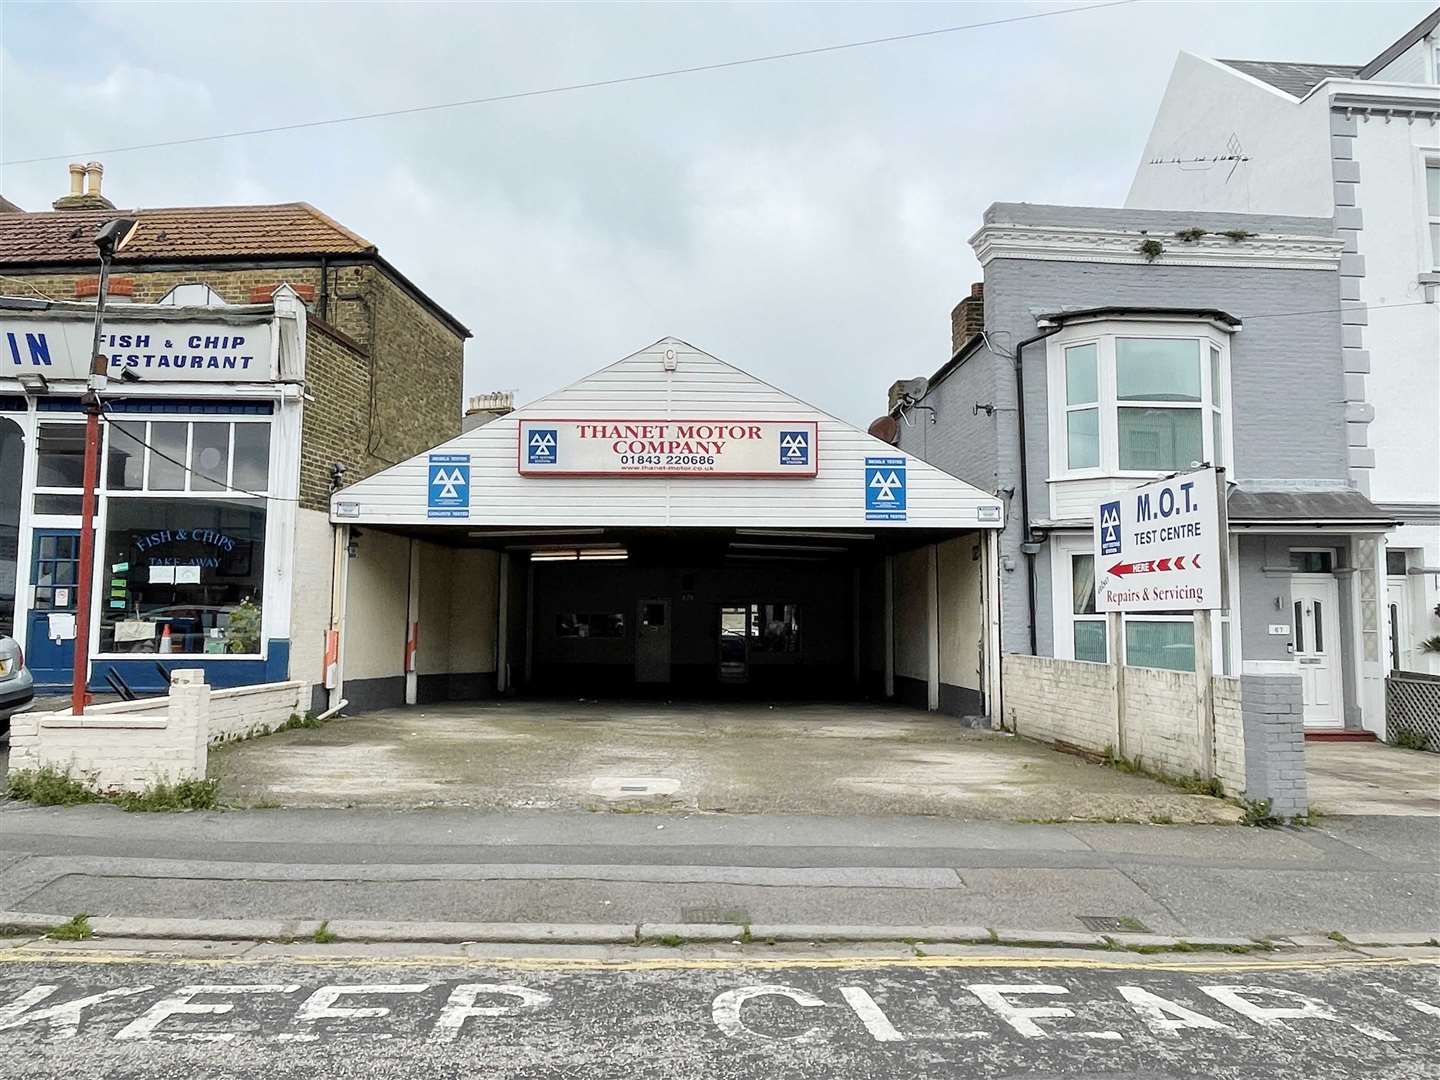 The site of the former Thanet Motor Company in Cliftonville is up for sale at auction